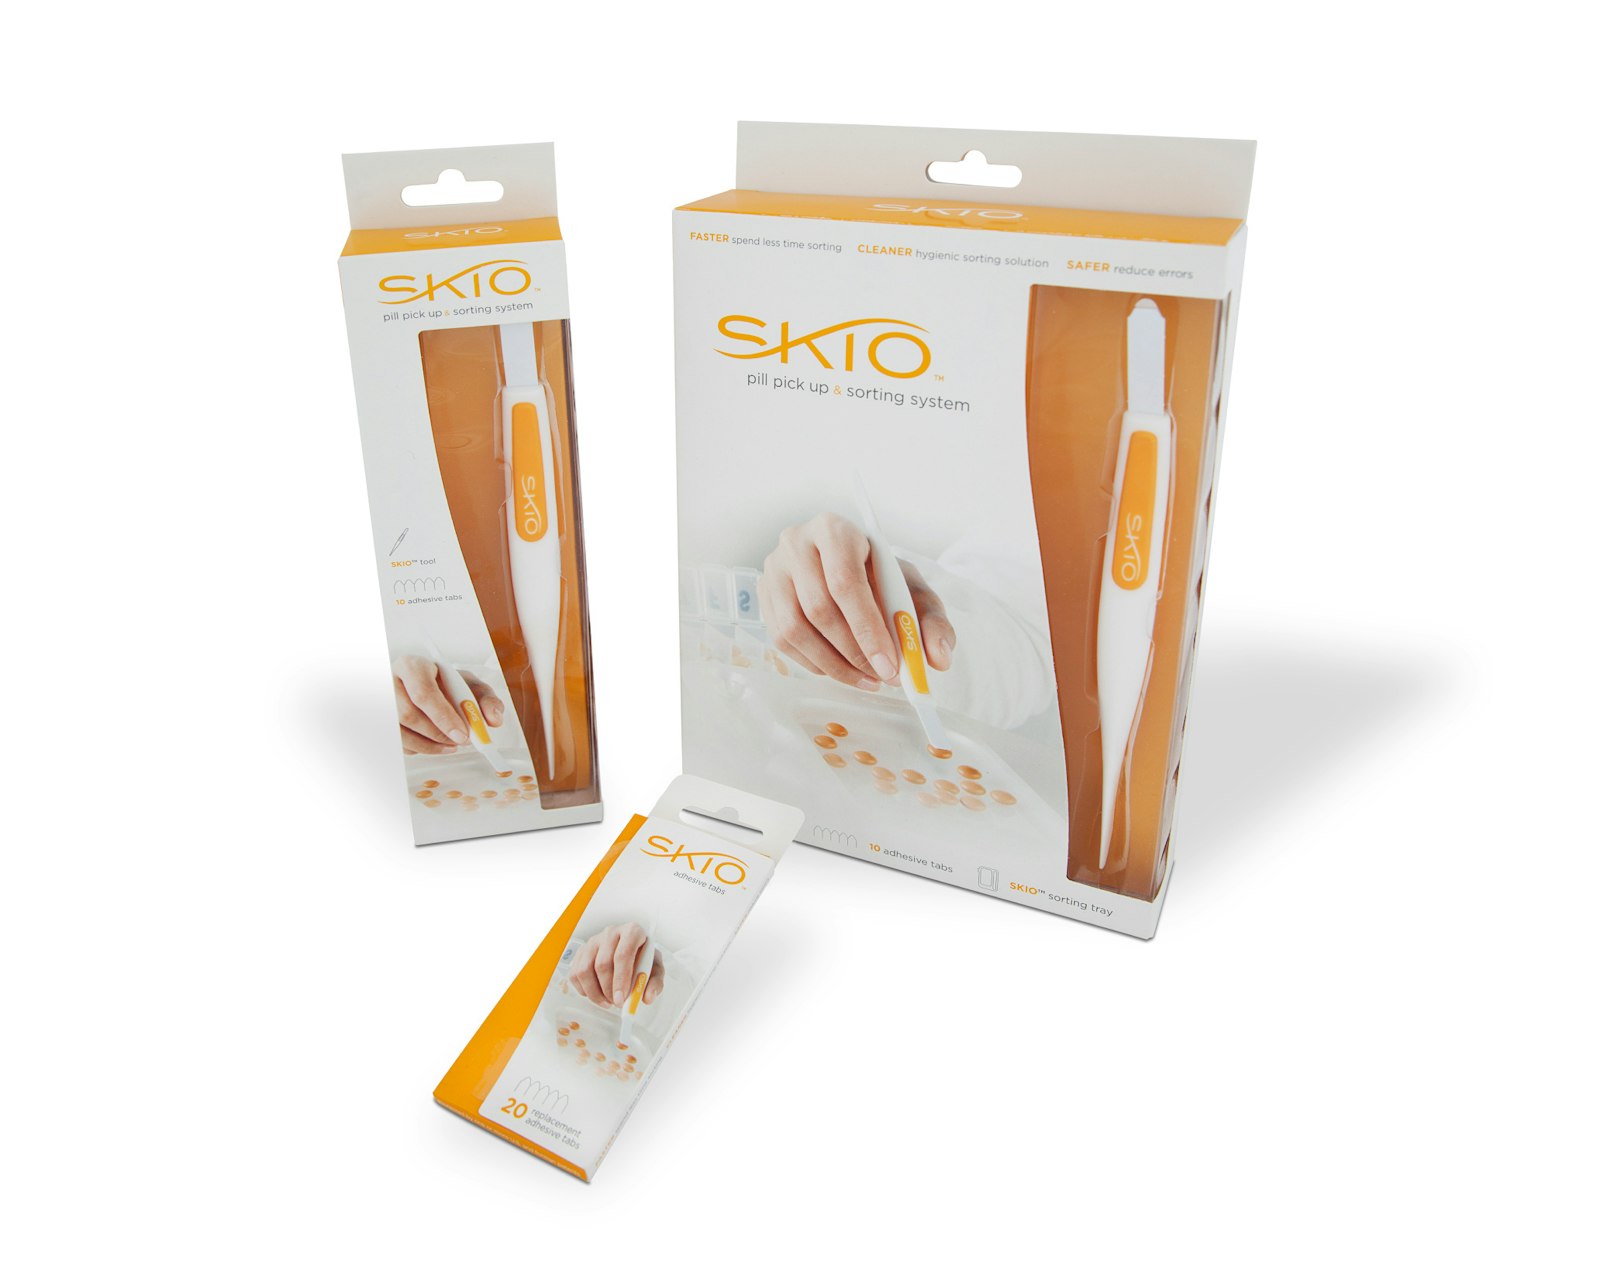 Three Skio pill pick up designed packages with branding and product showcased.